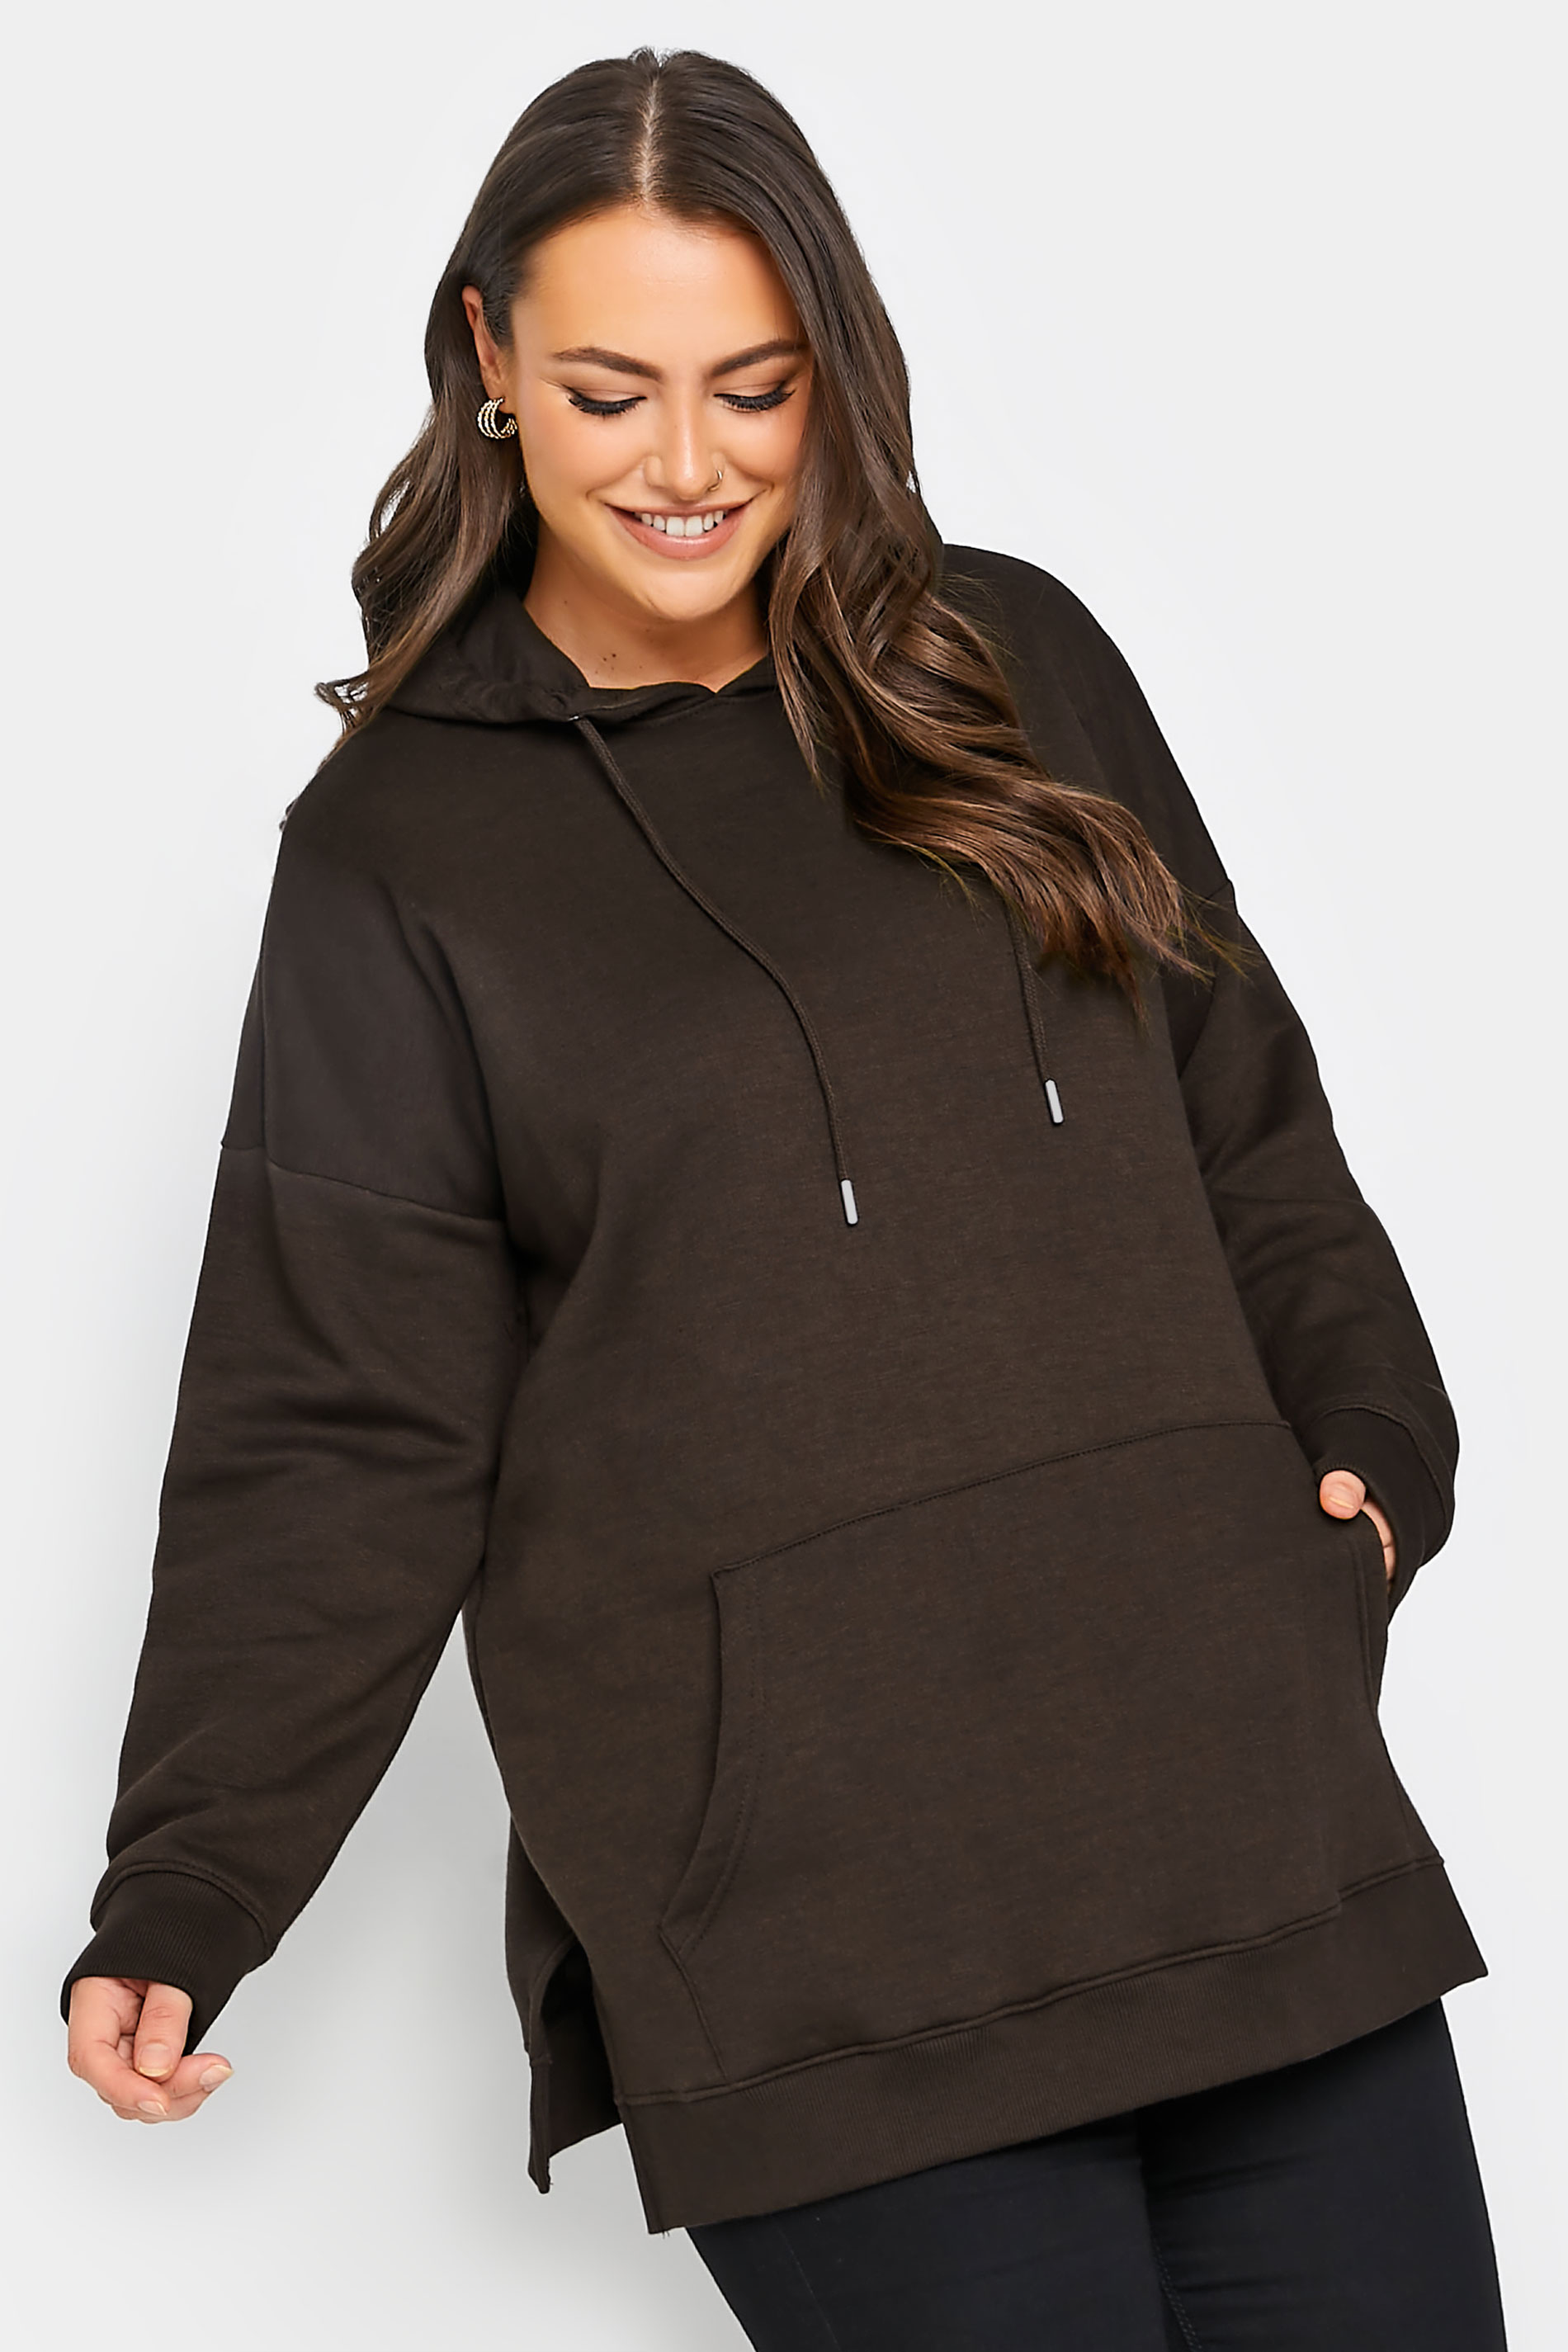 Plus Size Chocolate Brown Hoodie | Yours Clothing 1